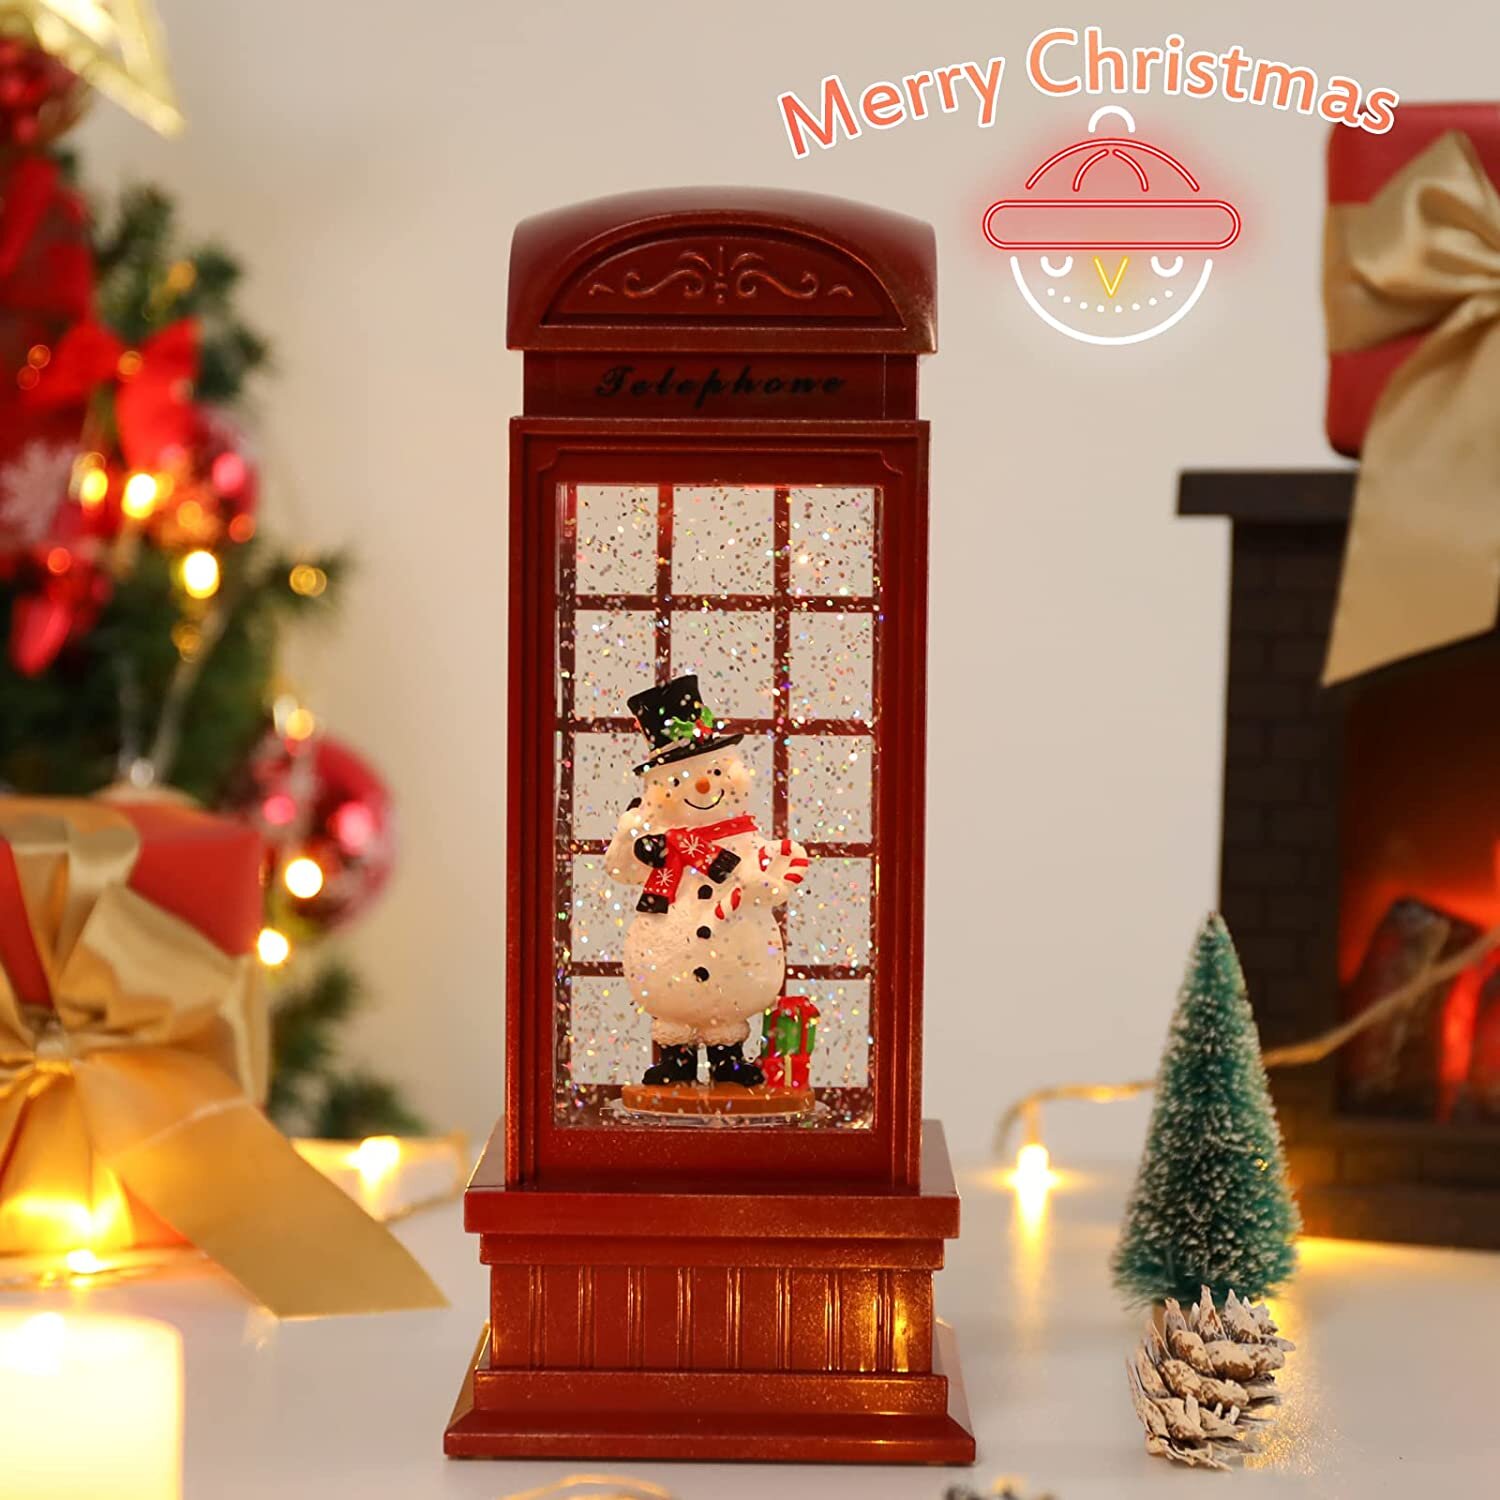 Home  Kitchen Candleholders USB Powered  Battery Operated Snow Globe  Lantern Decorative Table Lamp Vintage Christmas Decoration  Gift Snowman  Christmas Snow Globes Lantern christkindlmarket.com